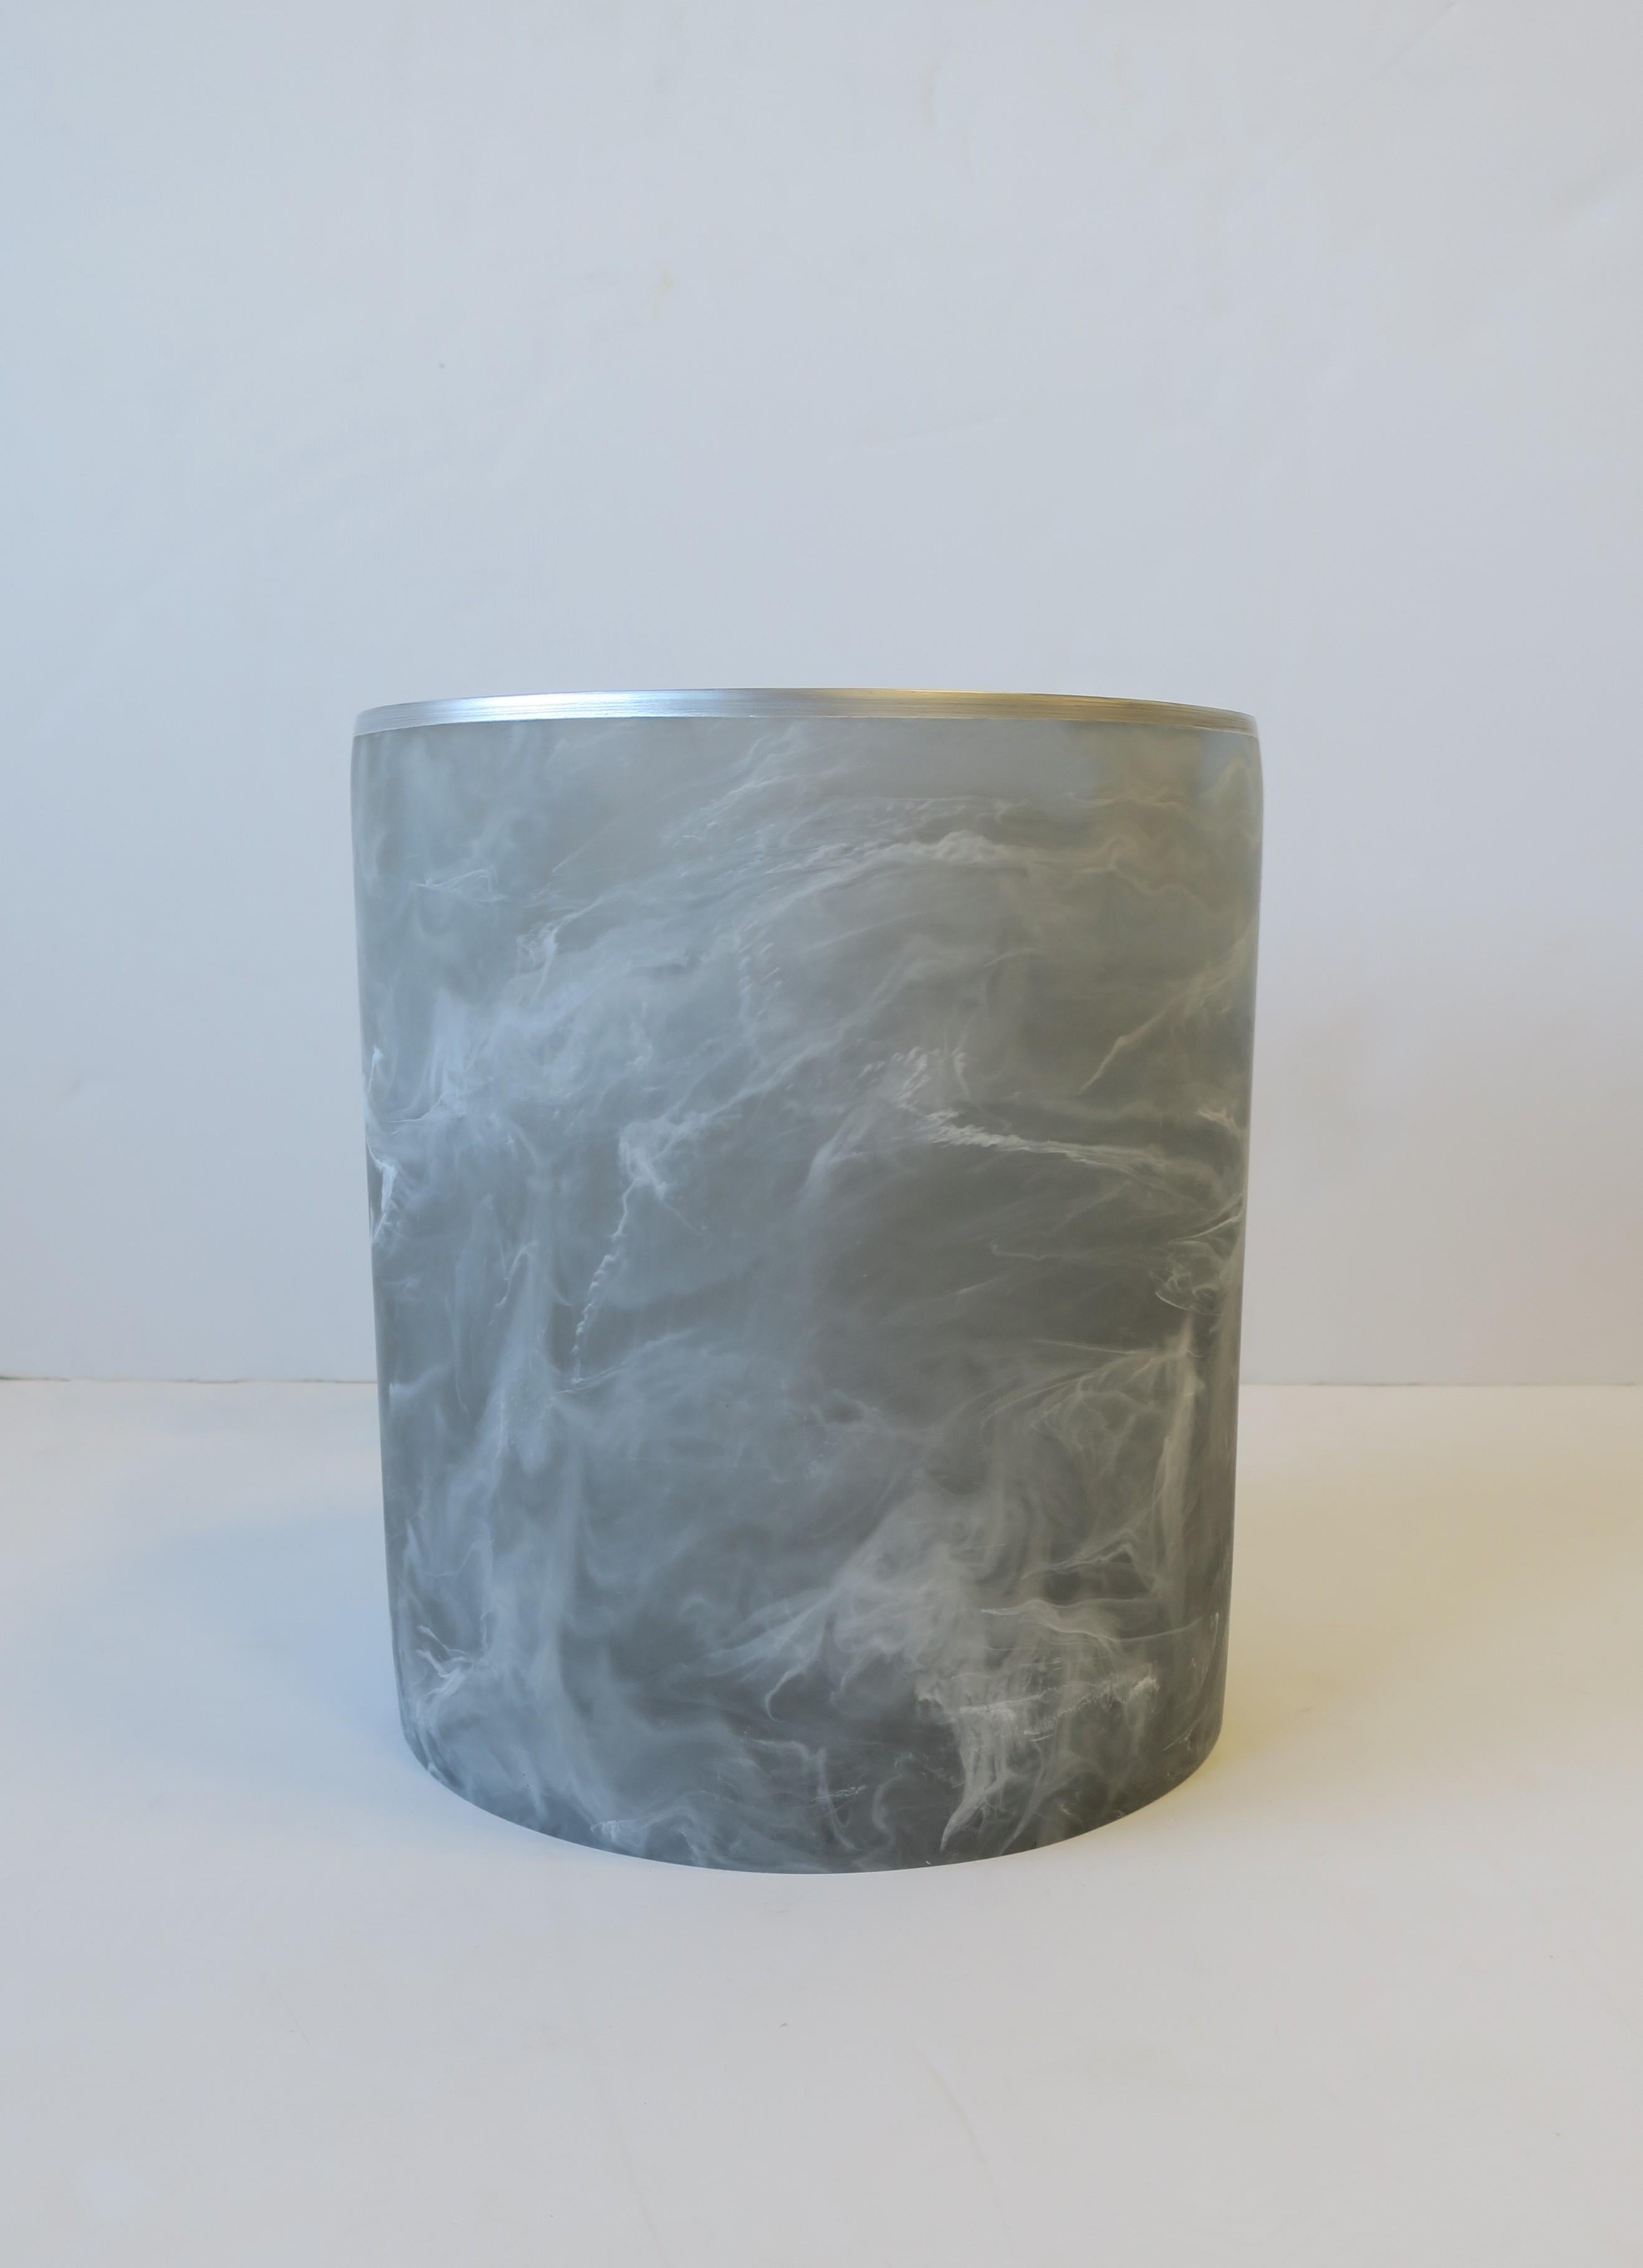 Resin Marble Style Acrylic Wastebasket or Trash Can in Grey and White